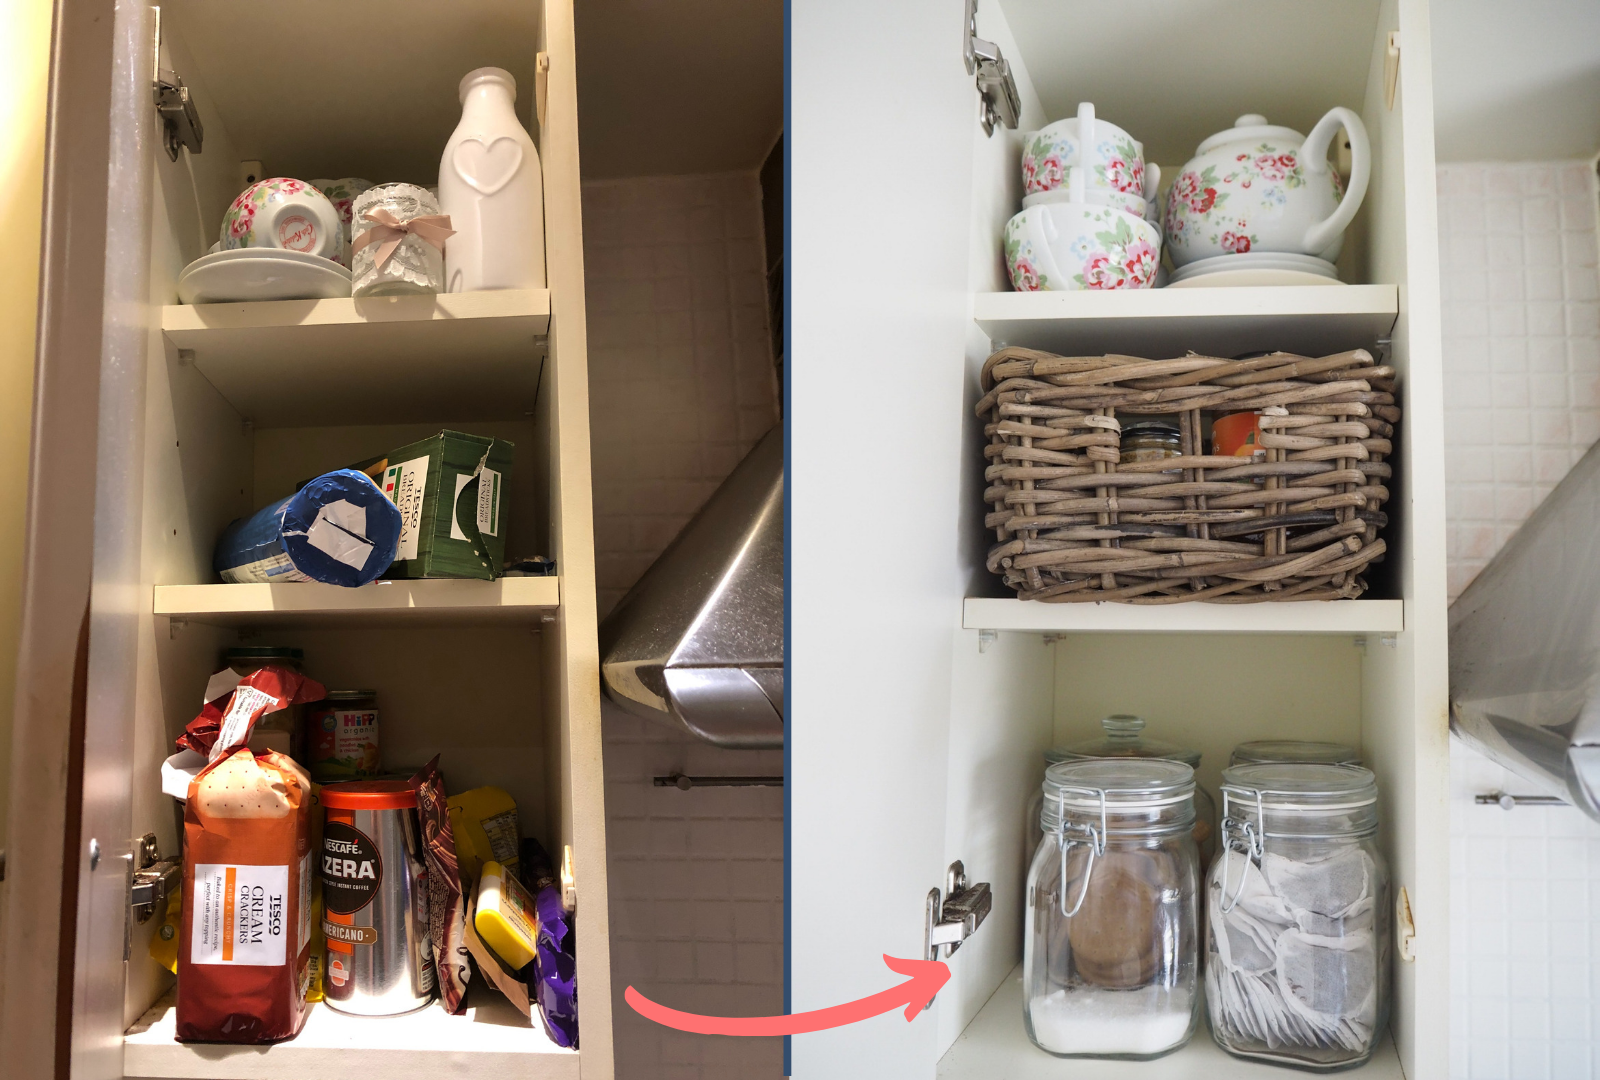 How to declutter your kitchen cupboards and create a tidy, clean and clutter-free pantry-style kitchen. Storage solutions for small homes and how to store all your food and utensils neatly